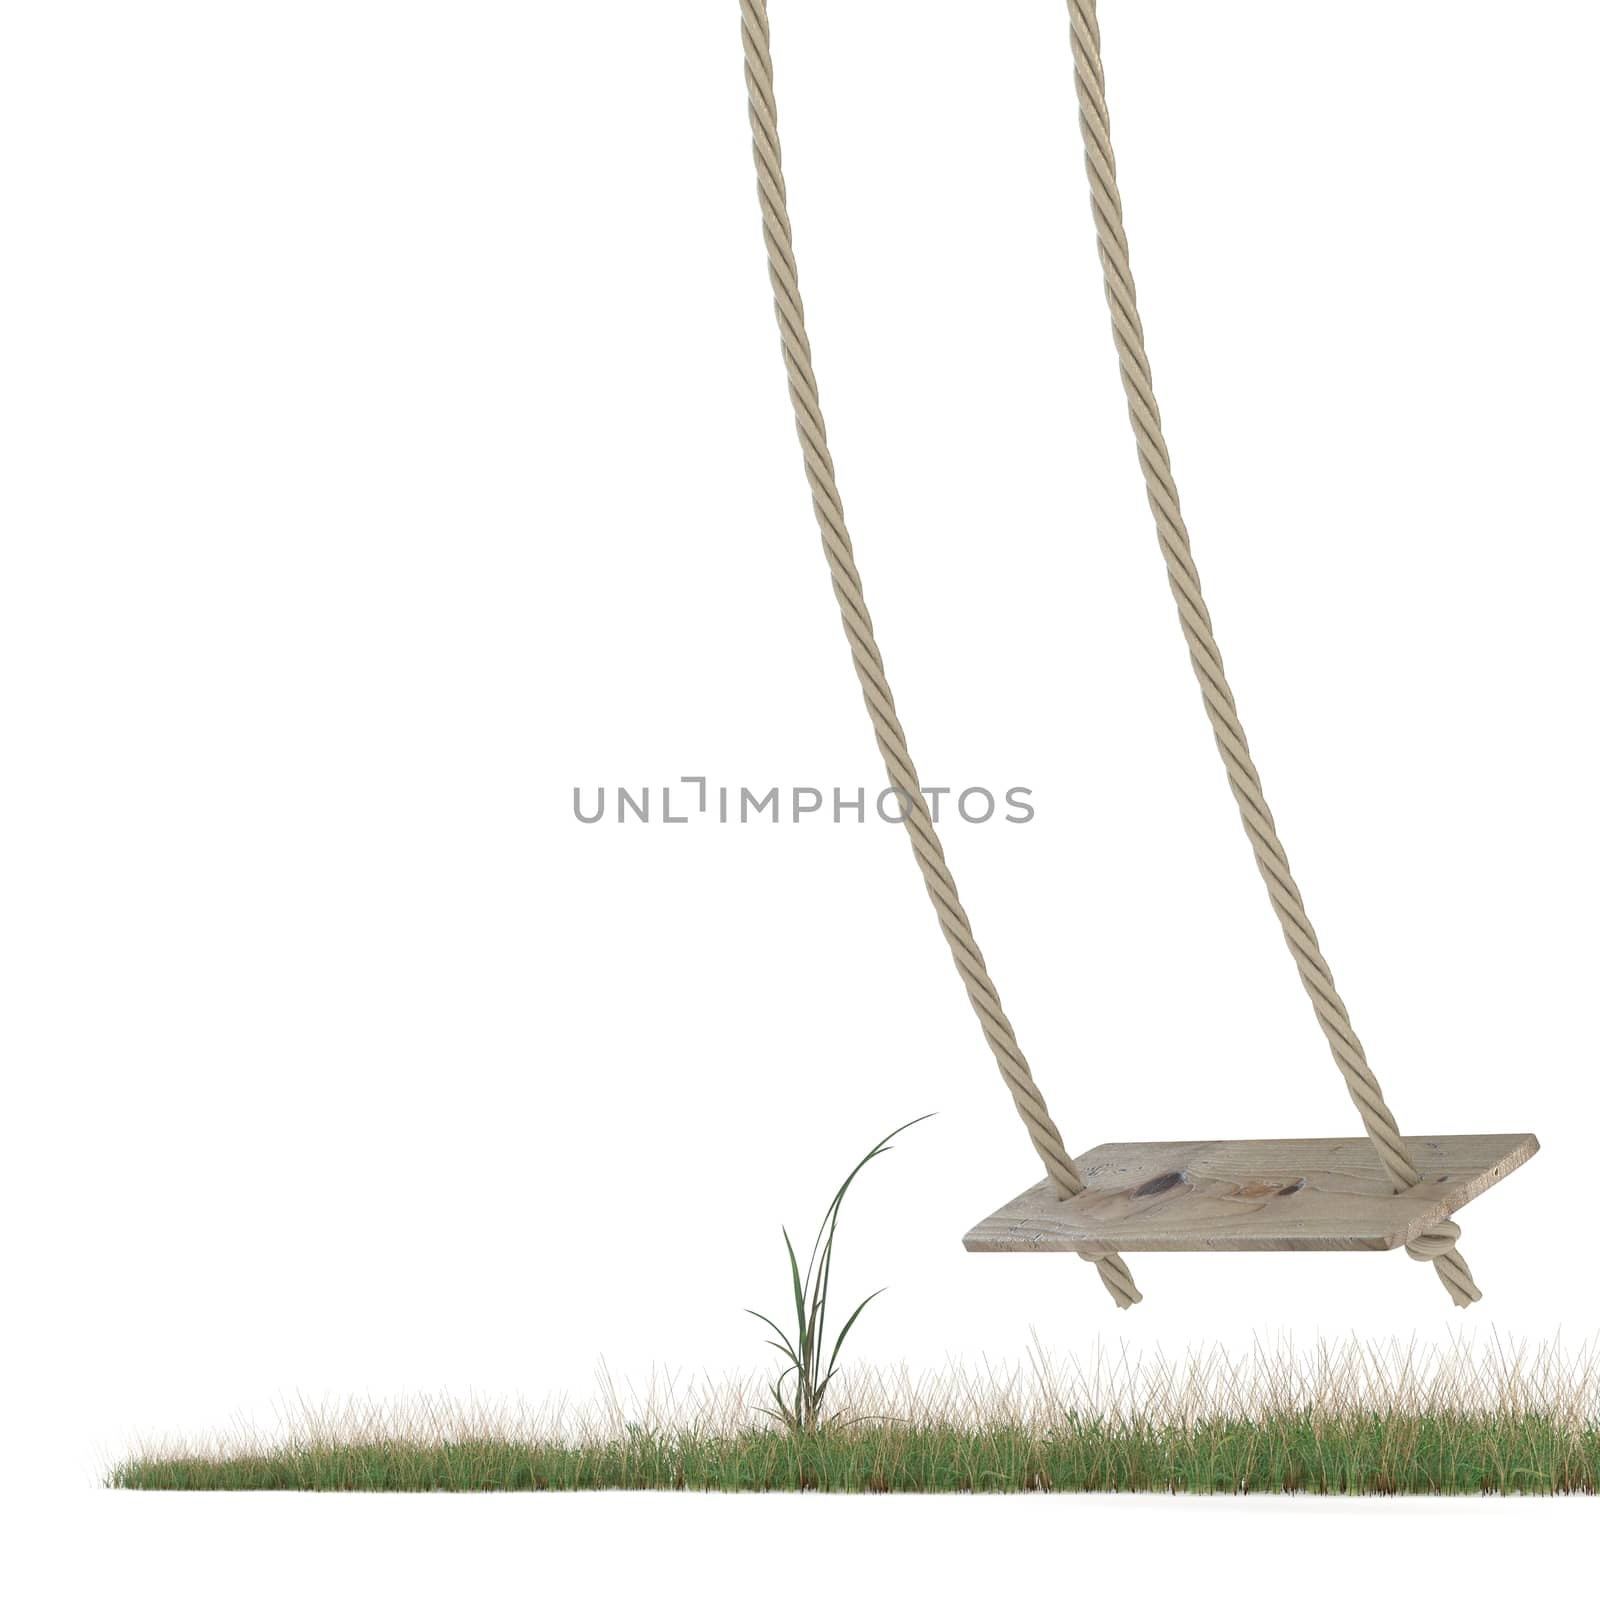 Swing made of rope and a wooden plank over grass ground. 3D by djmilic